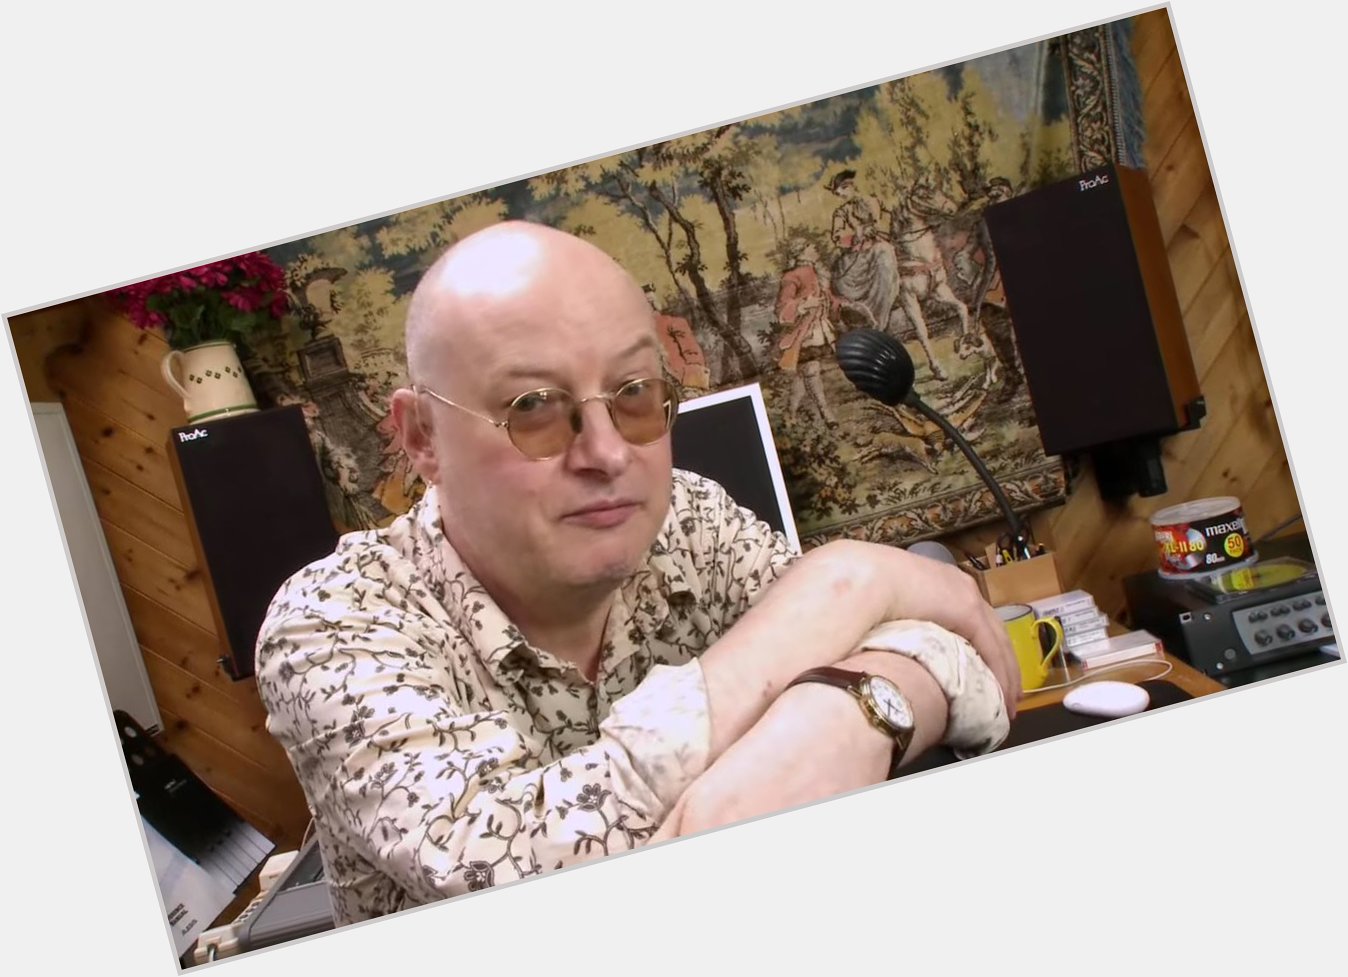 Happy birthday to my hero. The one and only Mr. Andy Partridge. 